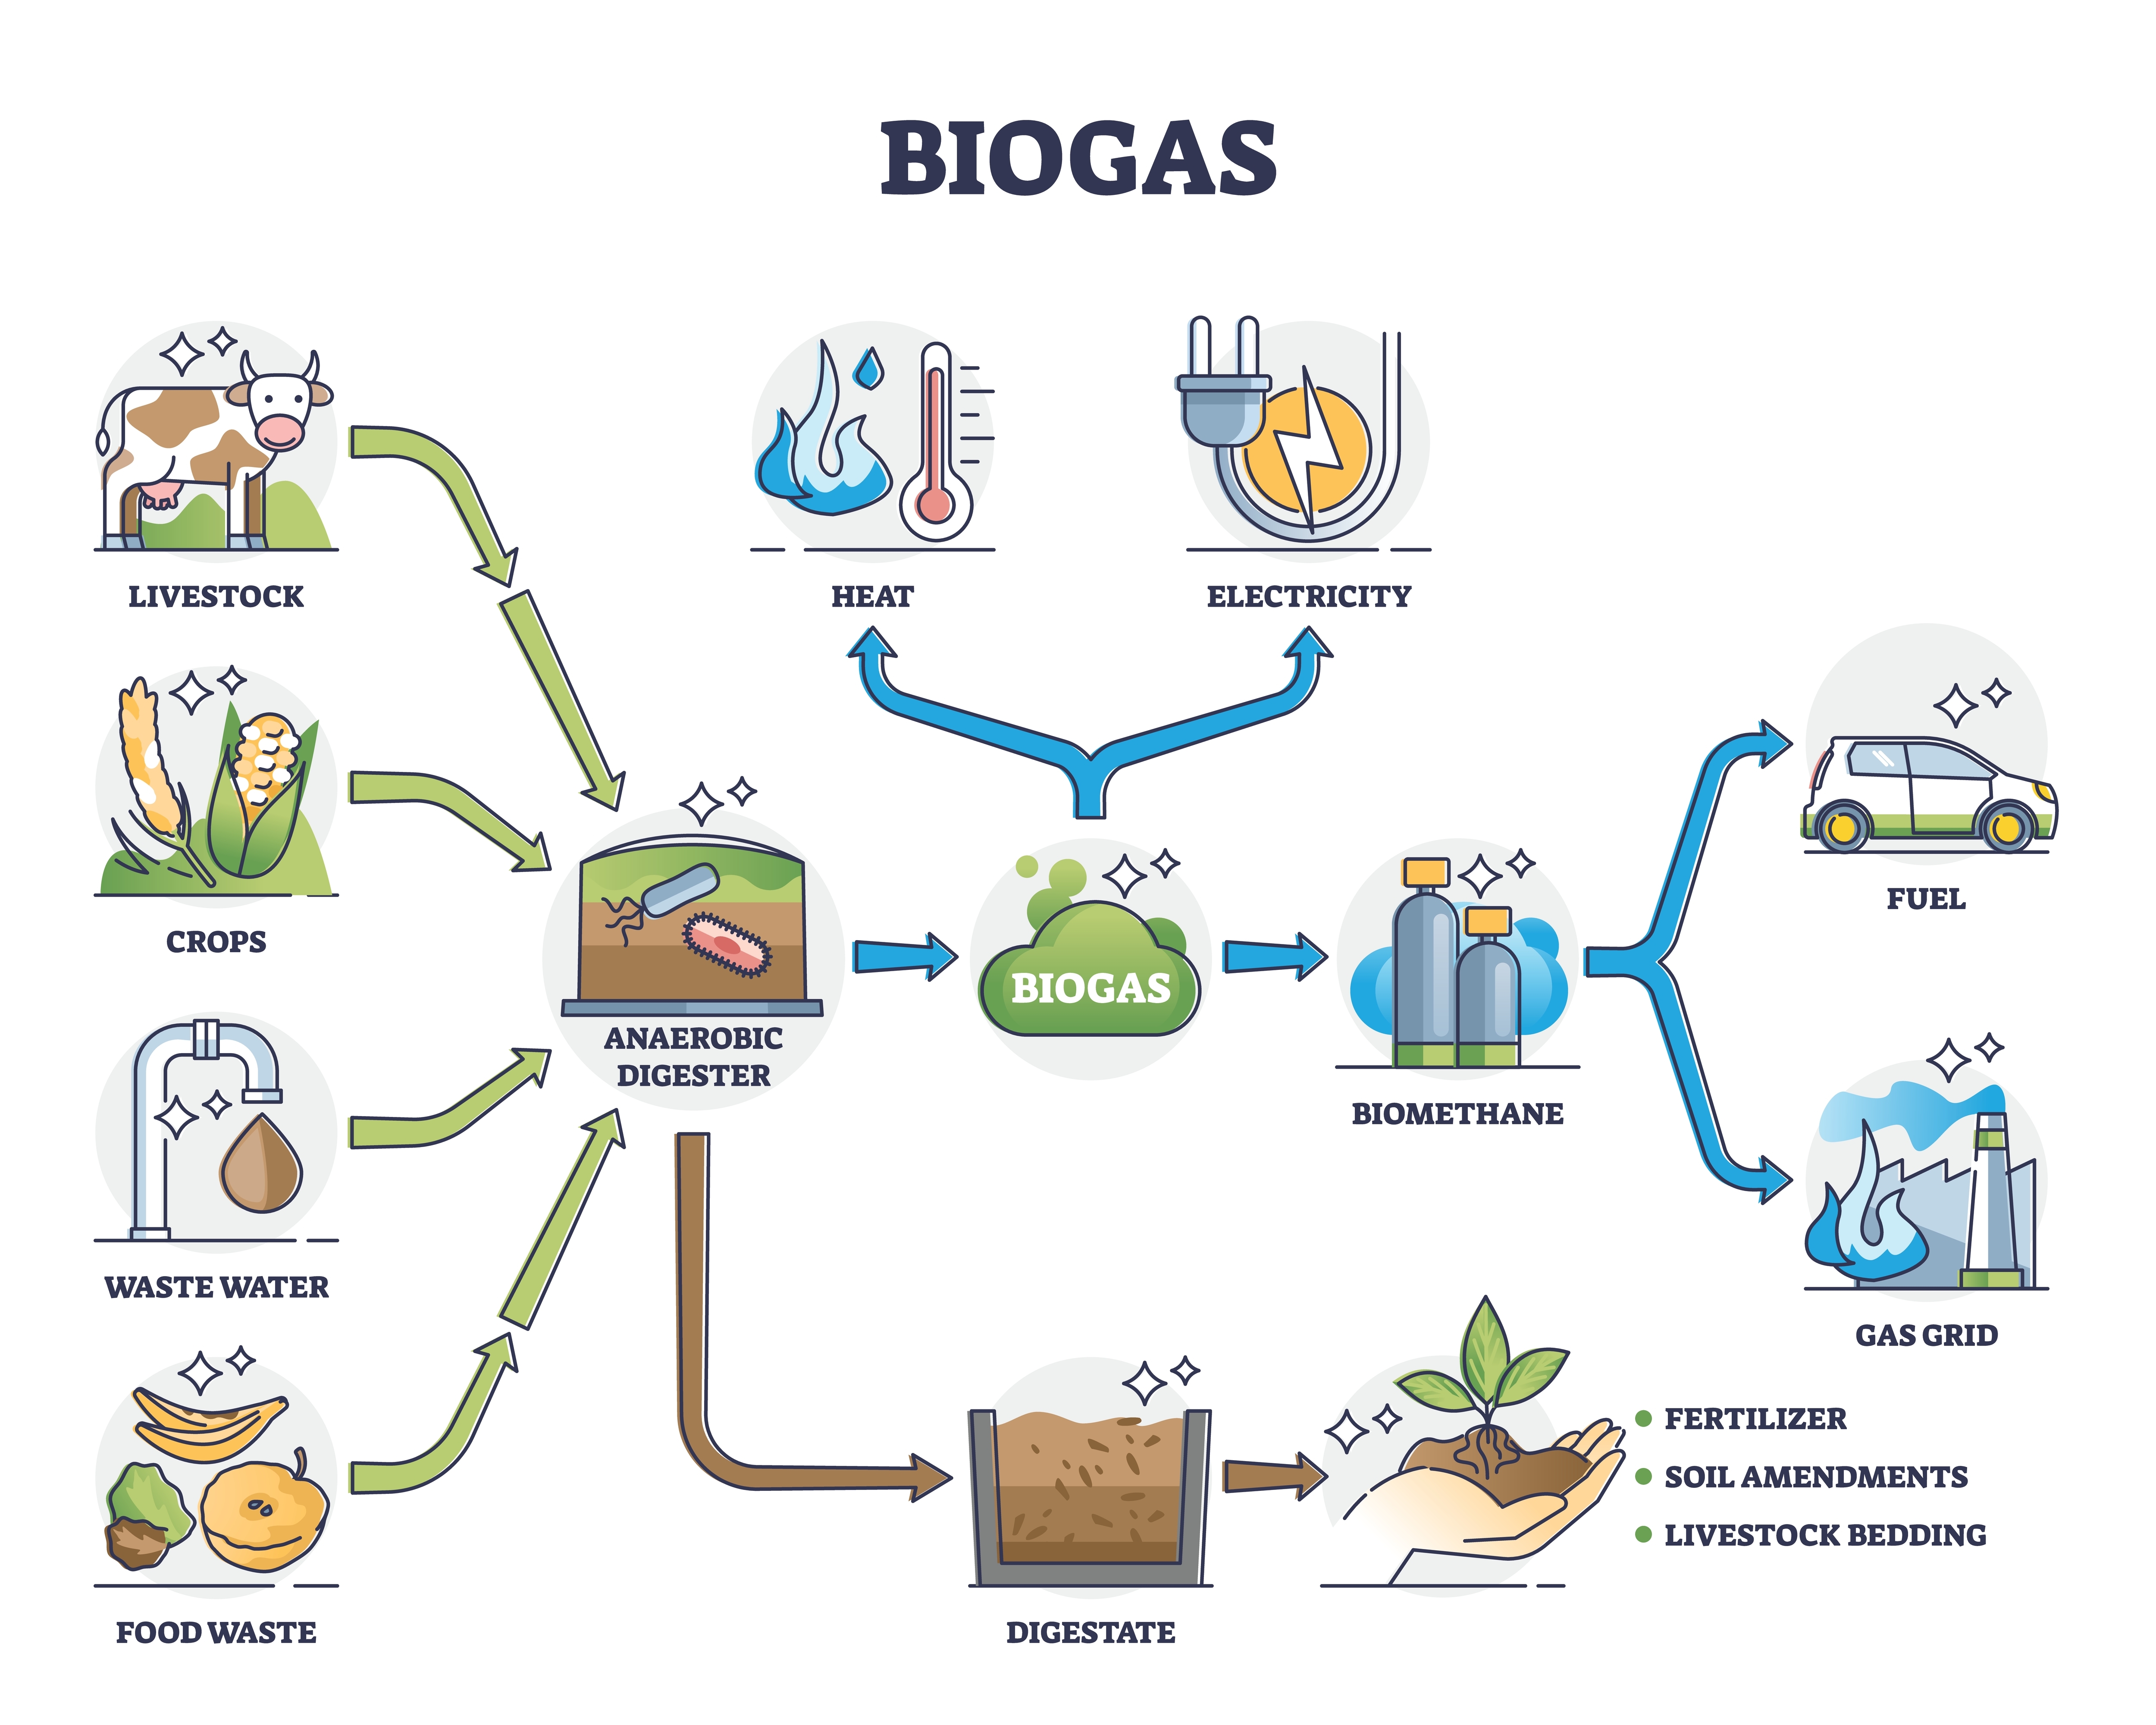 The Biogas extraction process